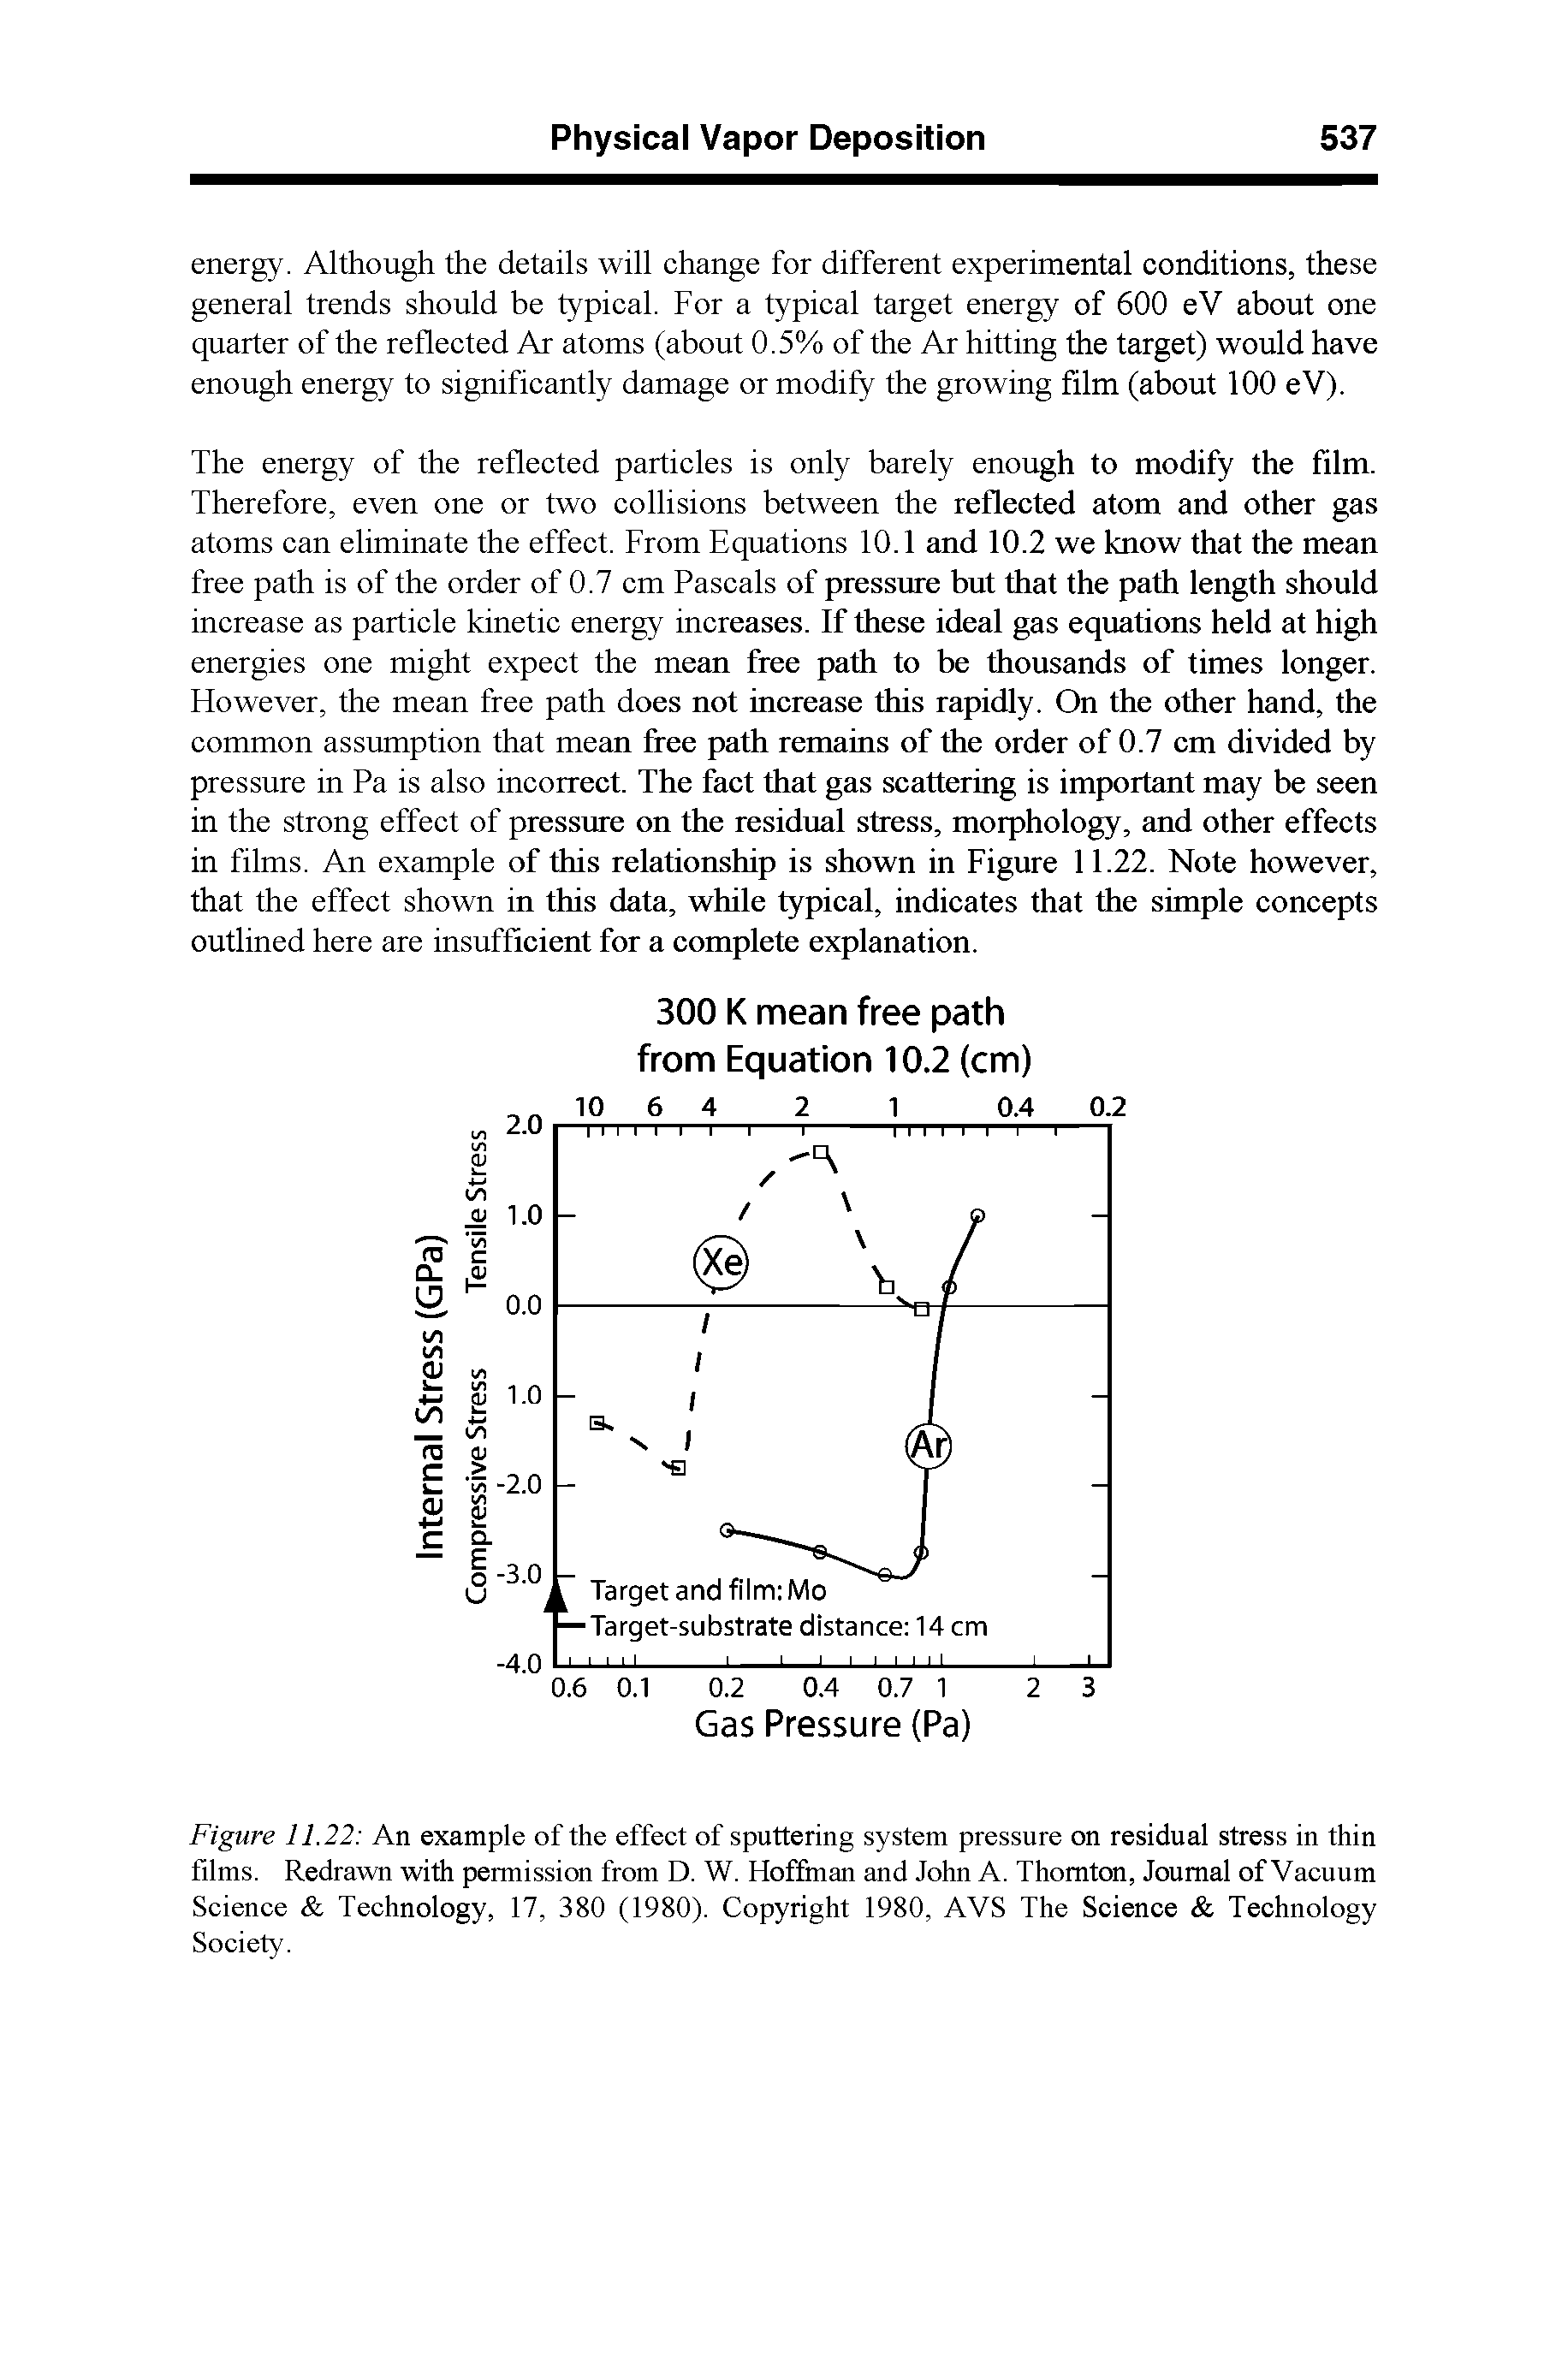 Figure 11.22 An example of the effeet of sputtering system pressure on residual stress in thin films. Redrawn with permission from D. W. Hoffman and John A. Thornton, Journal of Vaeuum Seienee Teehnology, 17, 380 (1980). Copyright 1980, AVS The Science Technology Society.